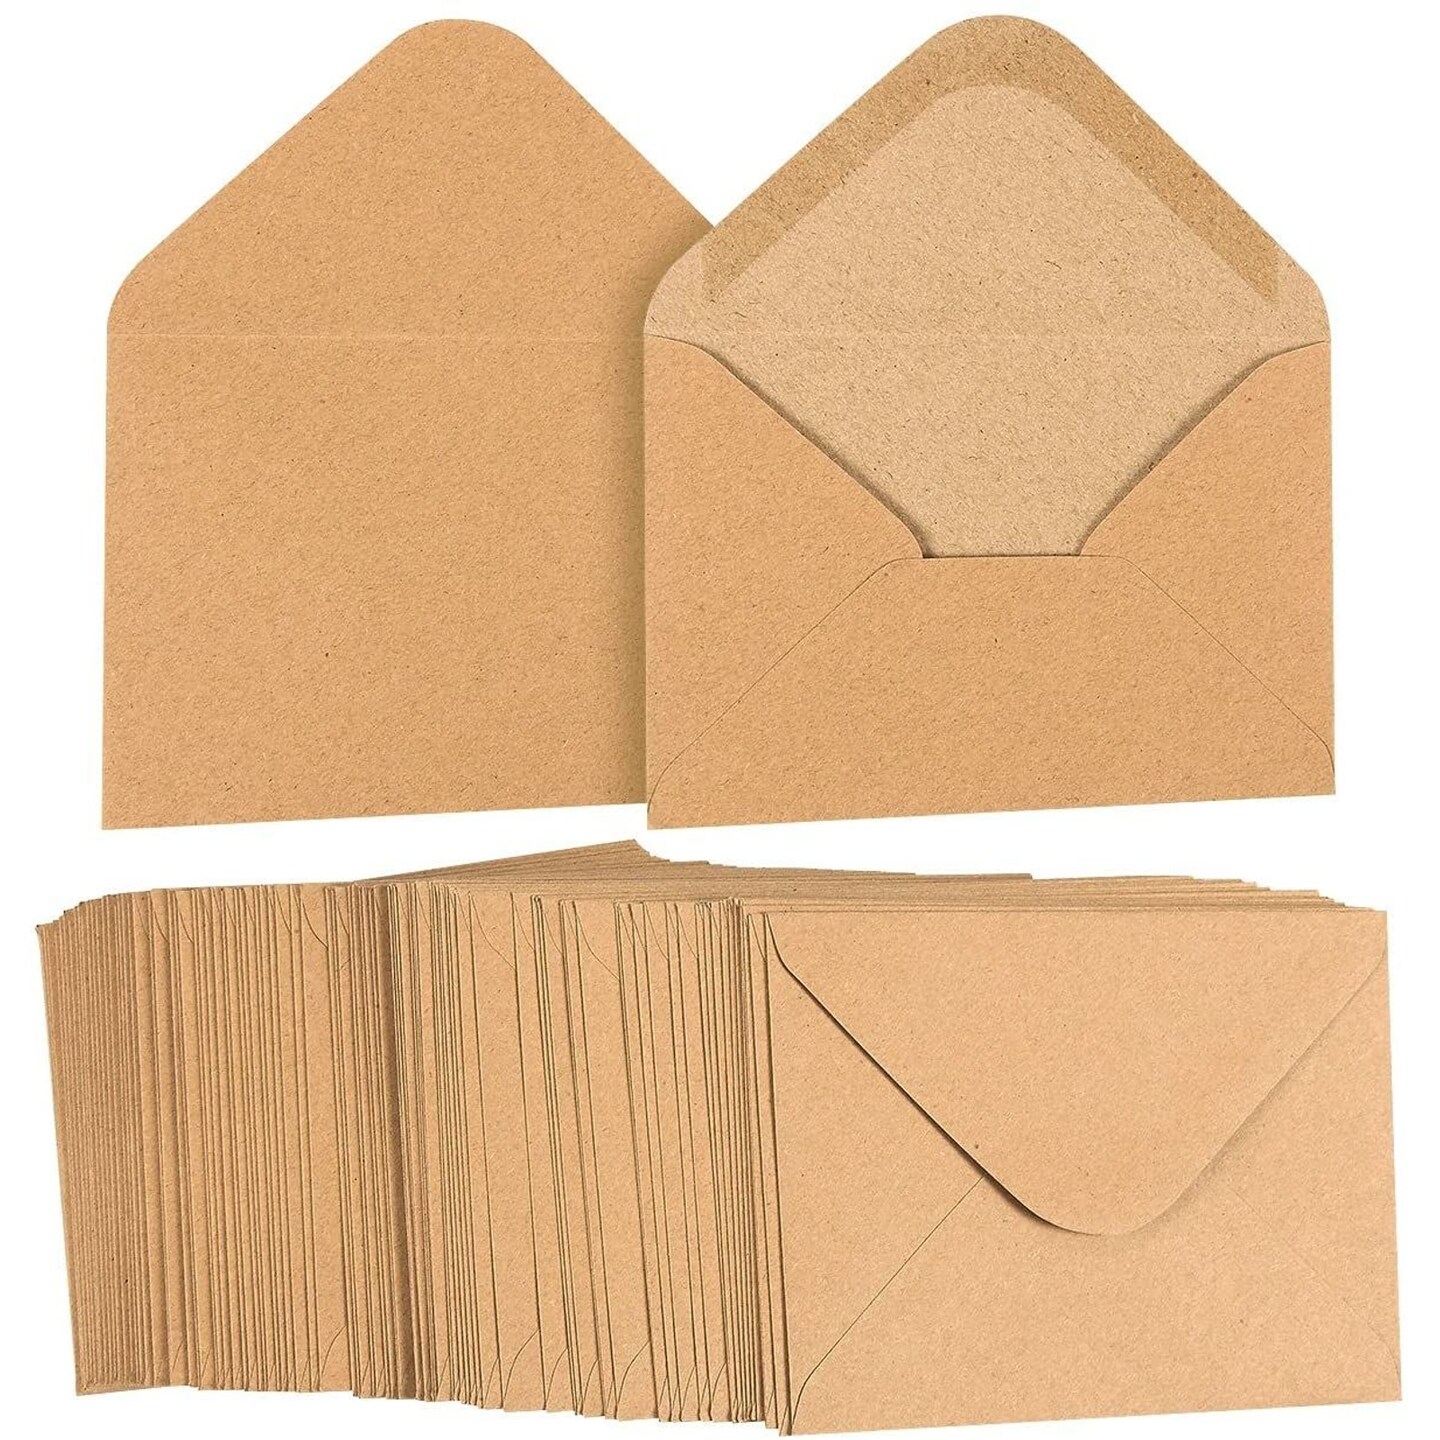 100 Pack Mini Envelopes with Colorful Blank Note Cards Small Self-Adhesive Envelopes Small Business Card Envelopes(4 x 2.7 Inches, 10 Colors)